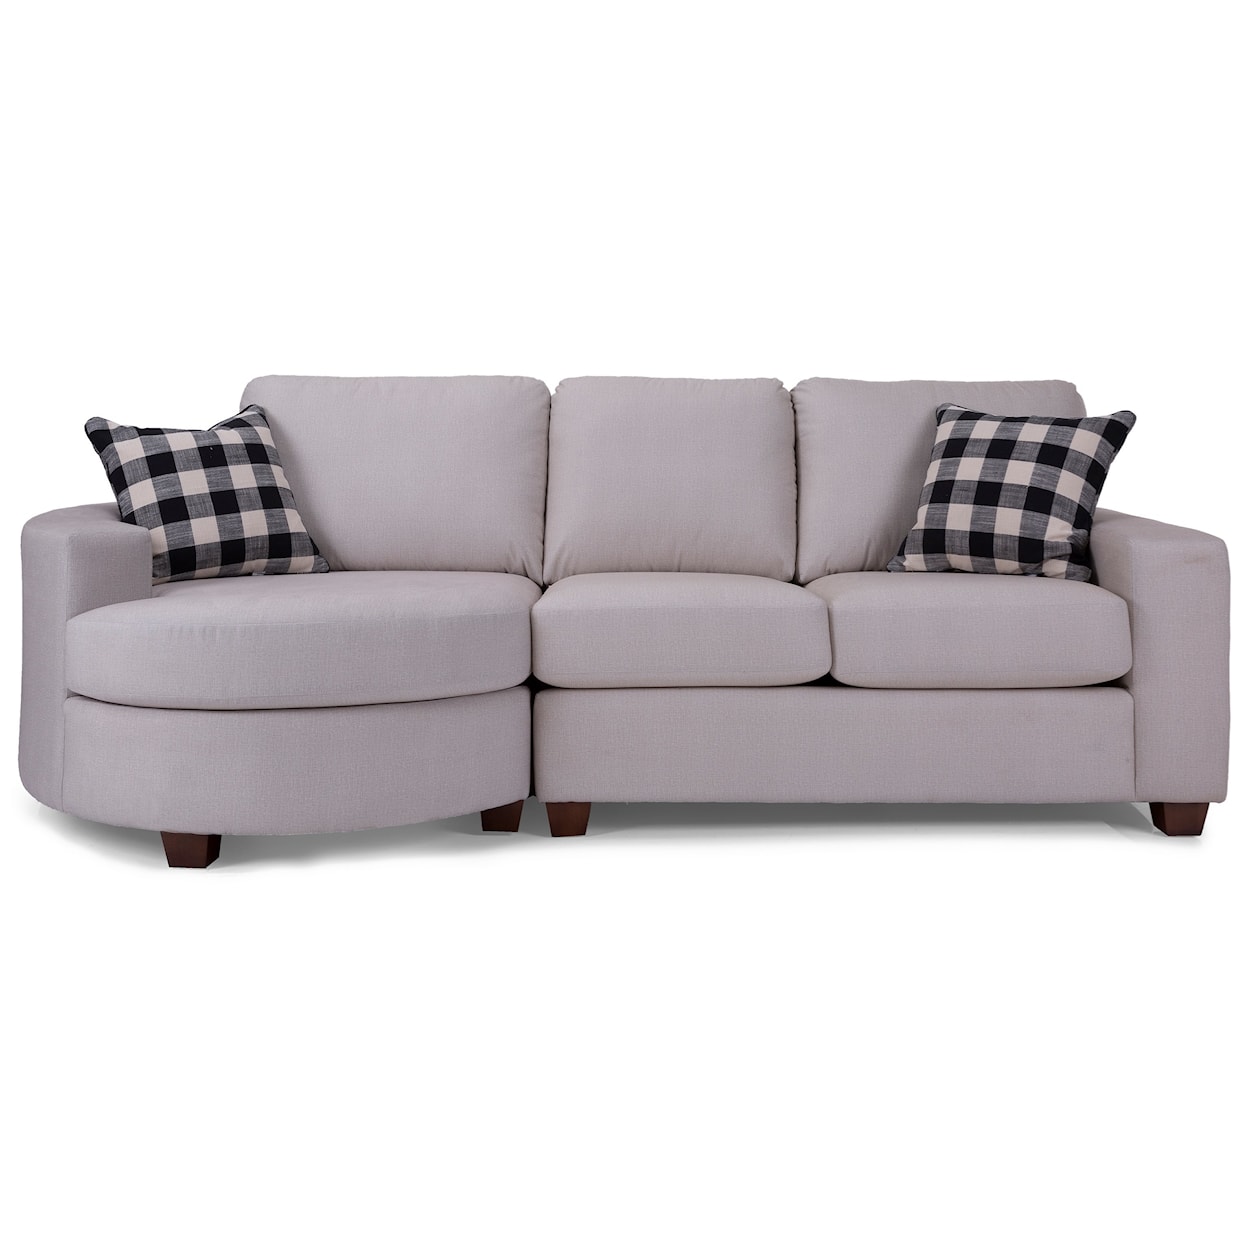 Decor-Rest Alessandra Connections Sofa with Bumper